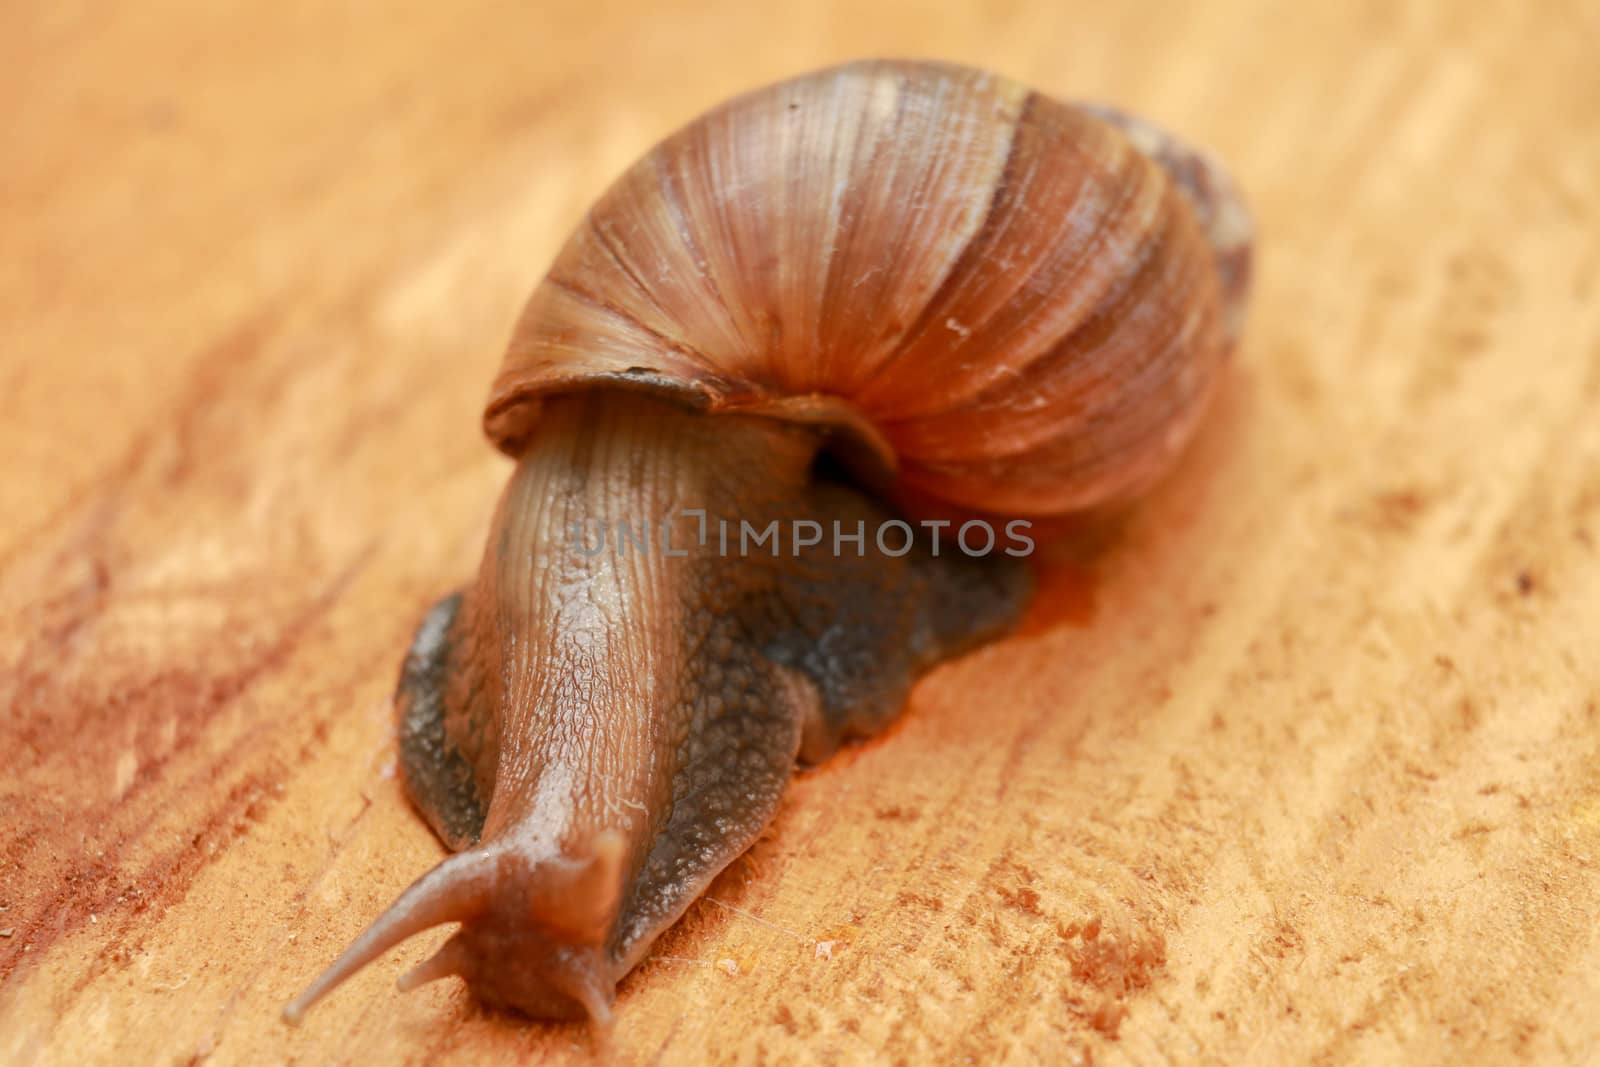 Giant snail, Scutalus, Achatina fulica. Crawling on wood in the afternoon. They have a coiled shell to protect body and Slime can made Nourishing cream. Natural animal. Slow life concept. Beautiful.